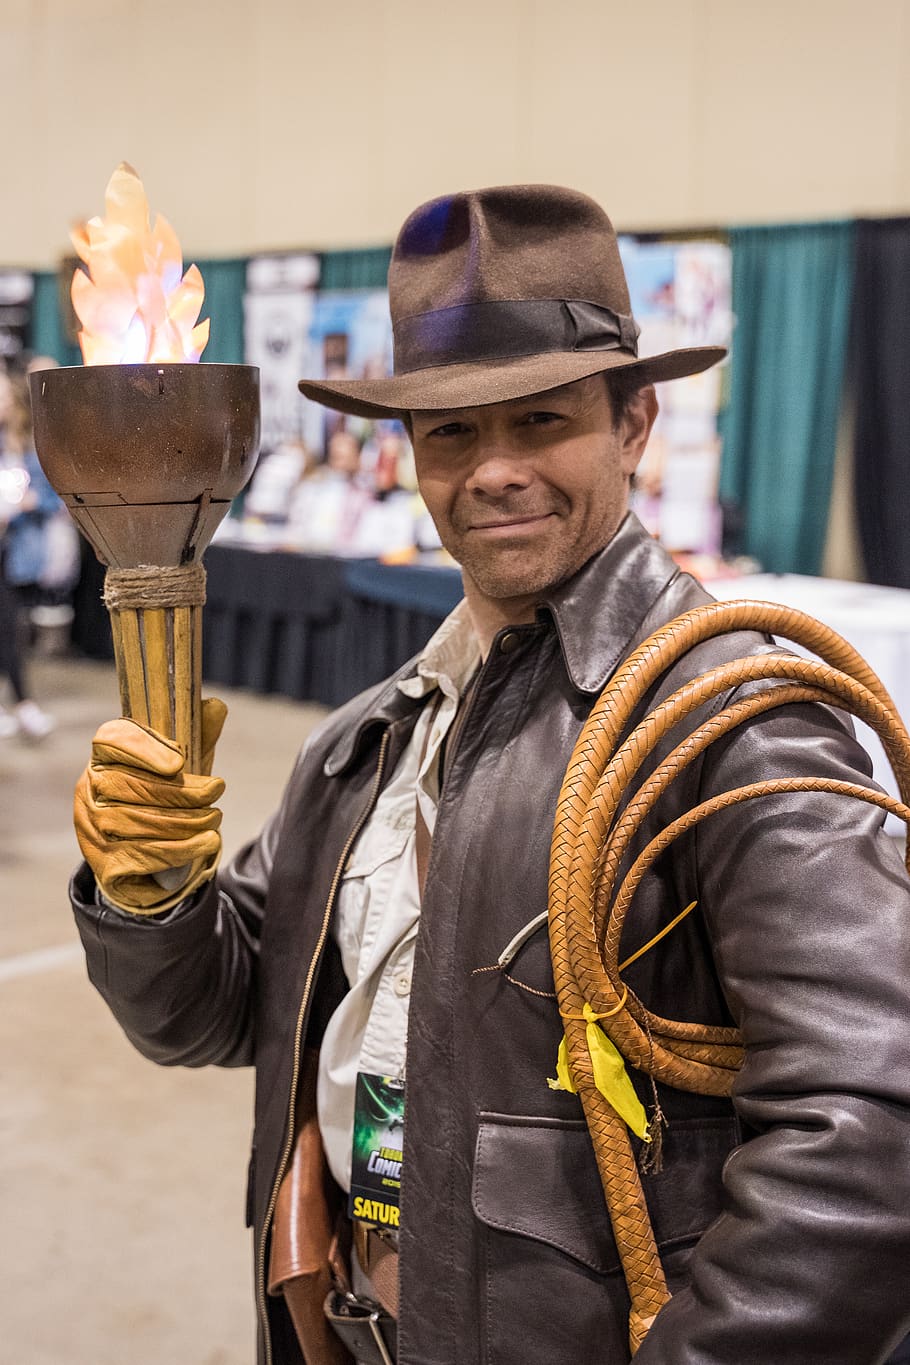 man in brown hat and jacket holding torch, apparel, clothing